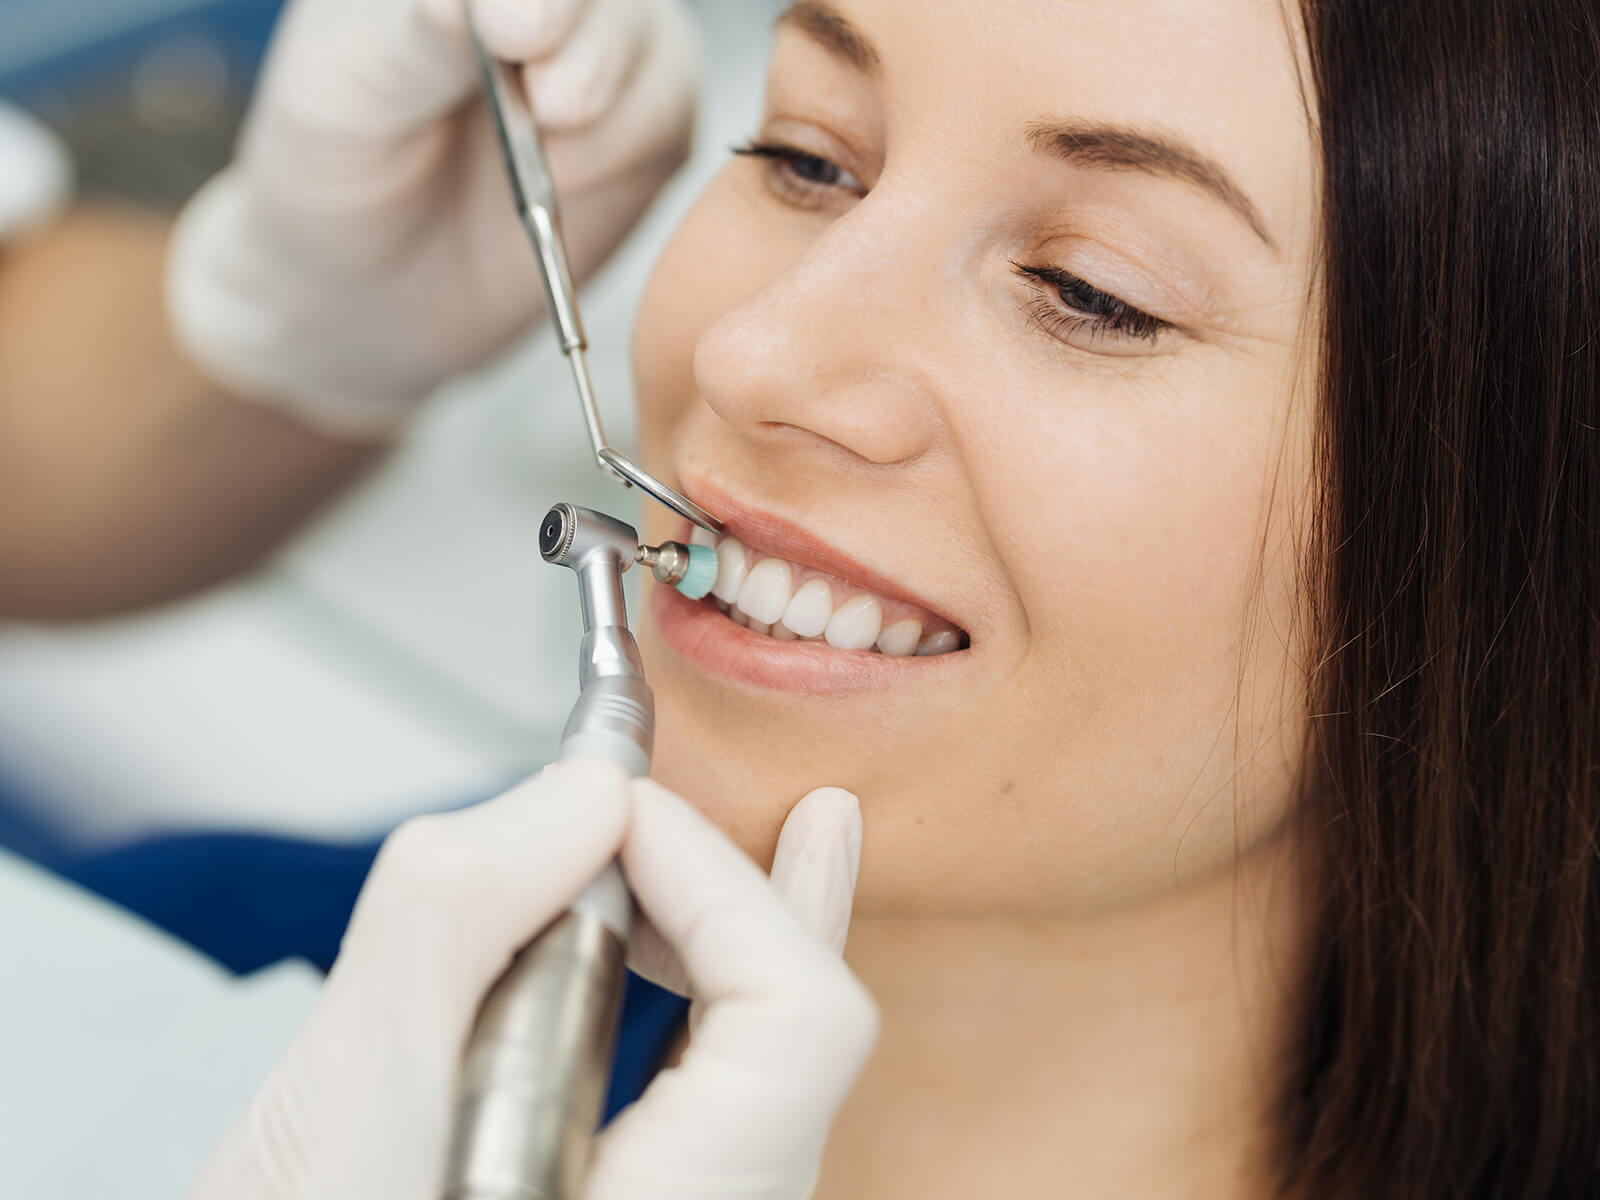 Does It Hurt To Undergo A Teeth Cleaning?